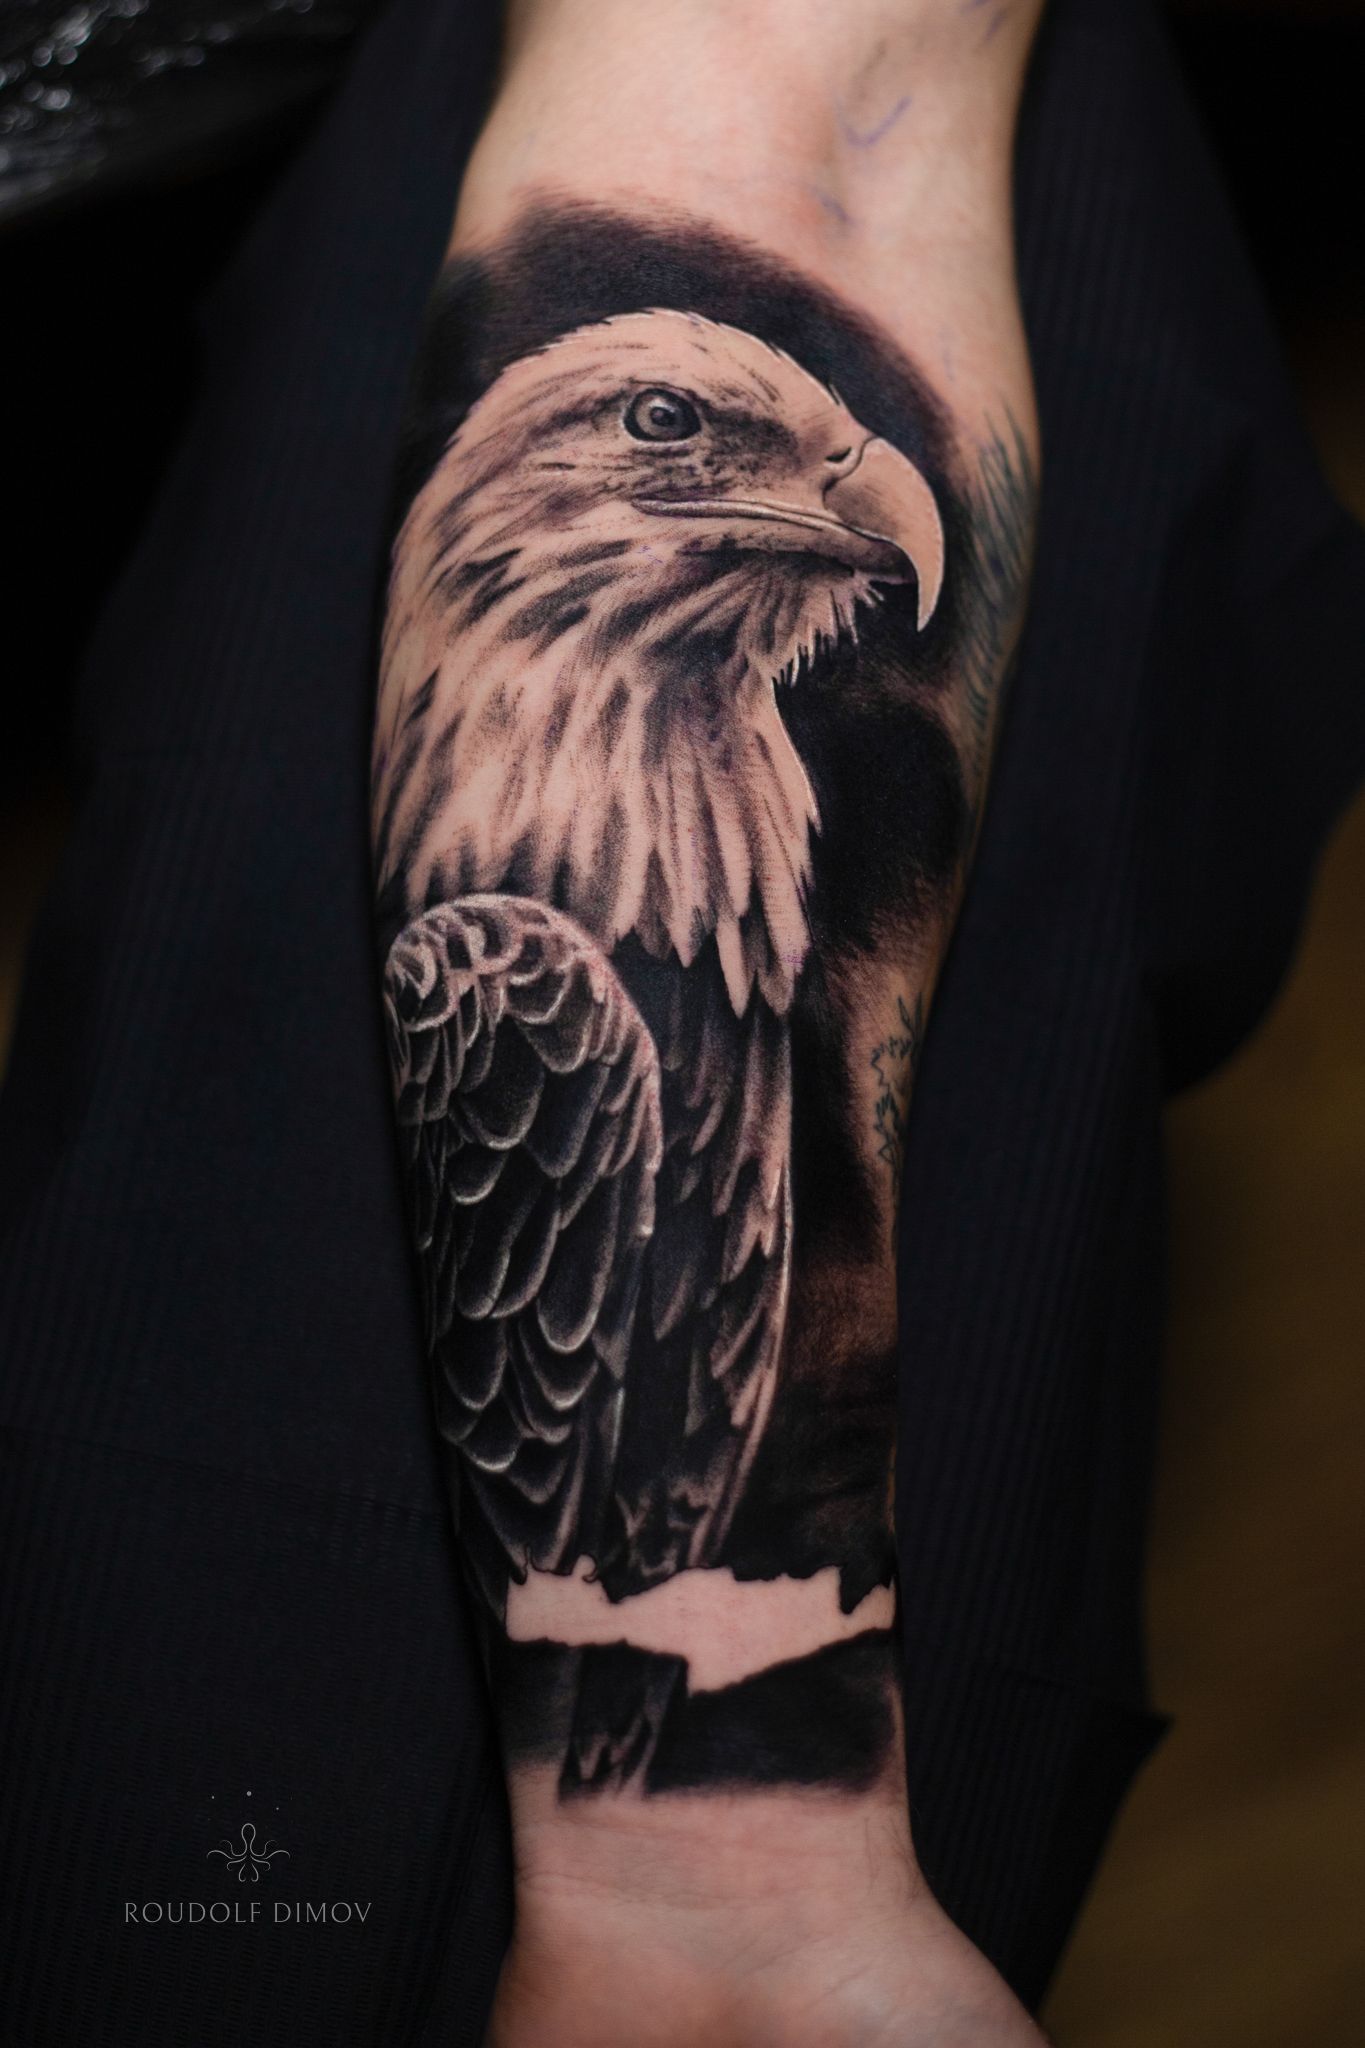 Stunning Tattoo Designs for Every Style